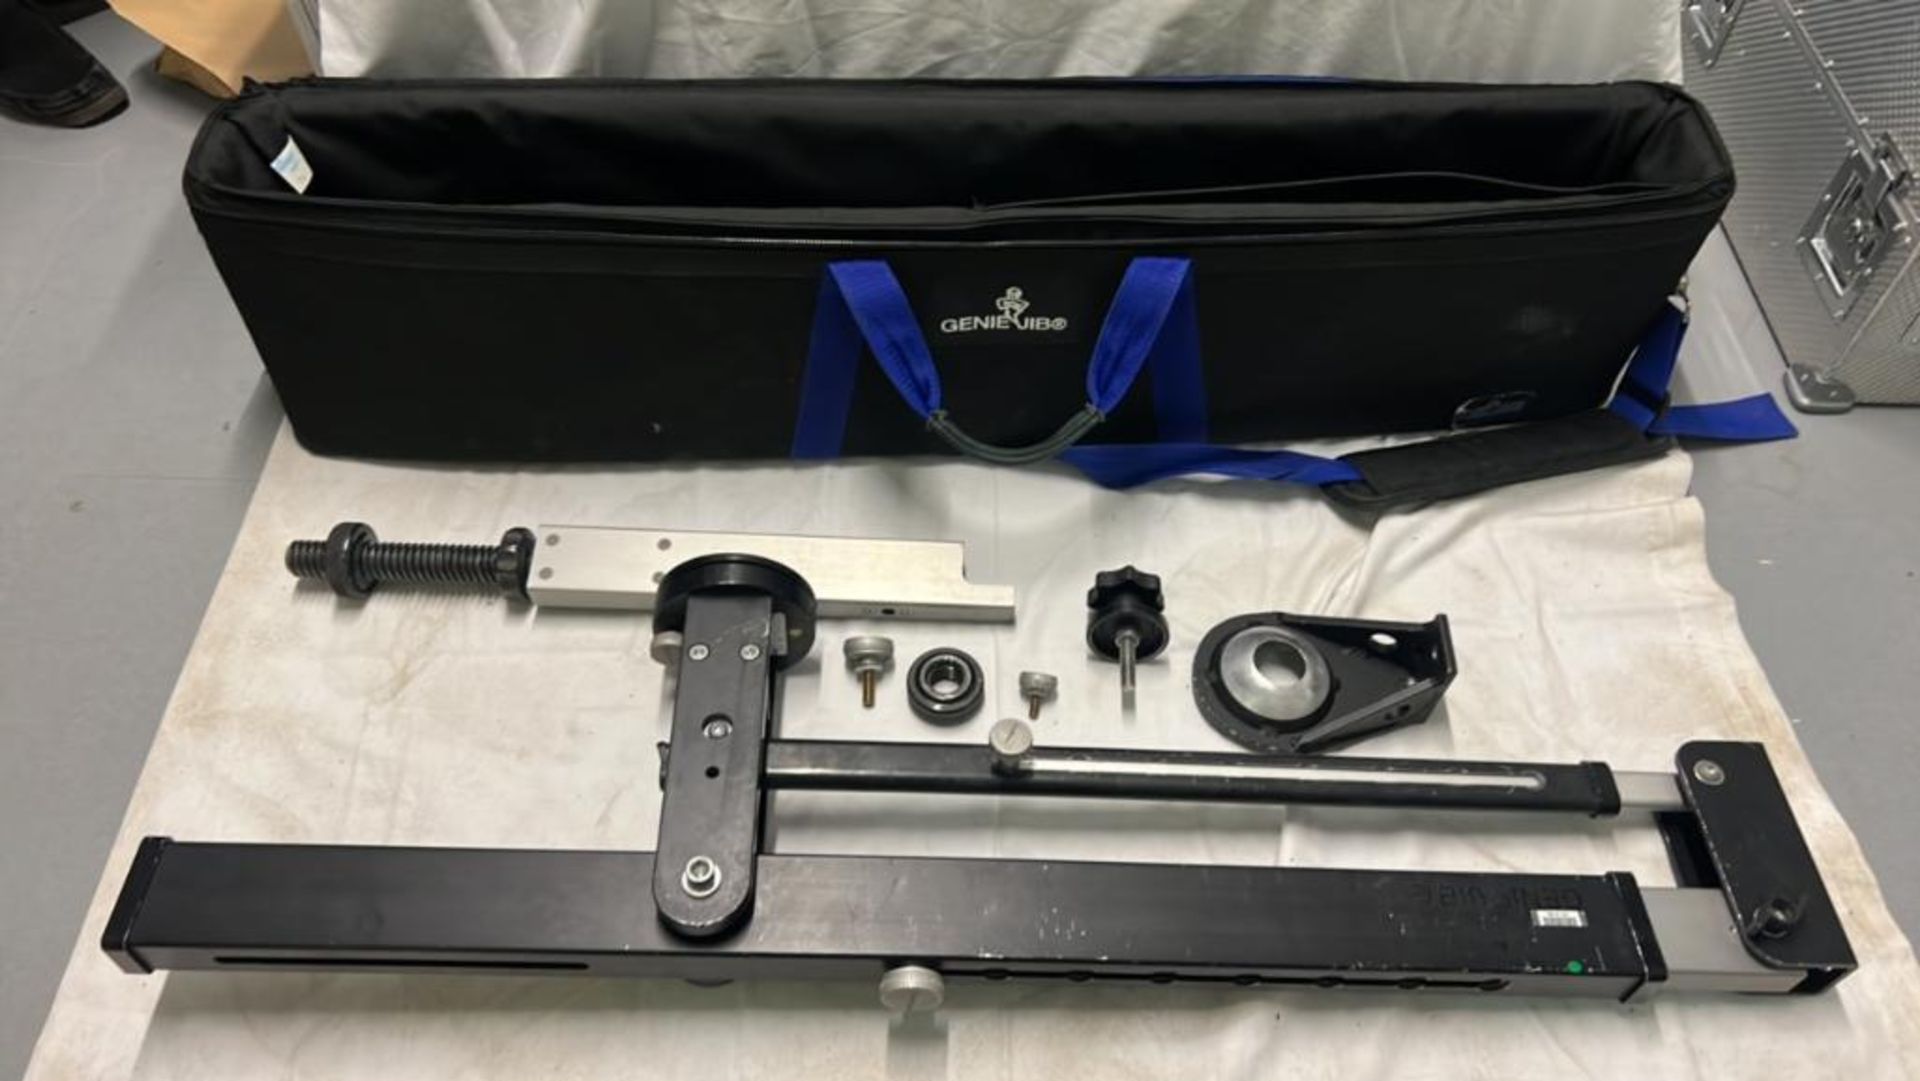 Egripment Universal Dolly in Carry Bag SN: 424-75-15 - Image 2 of 3